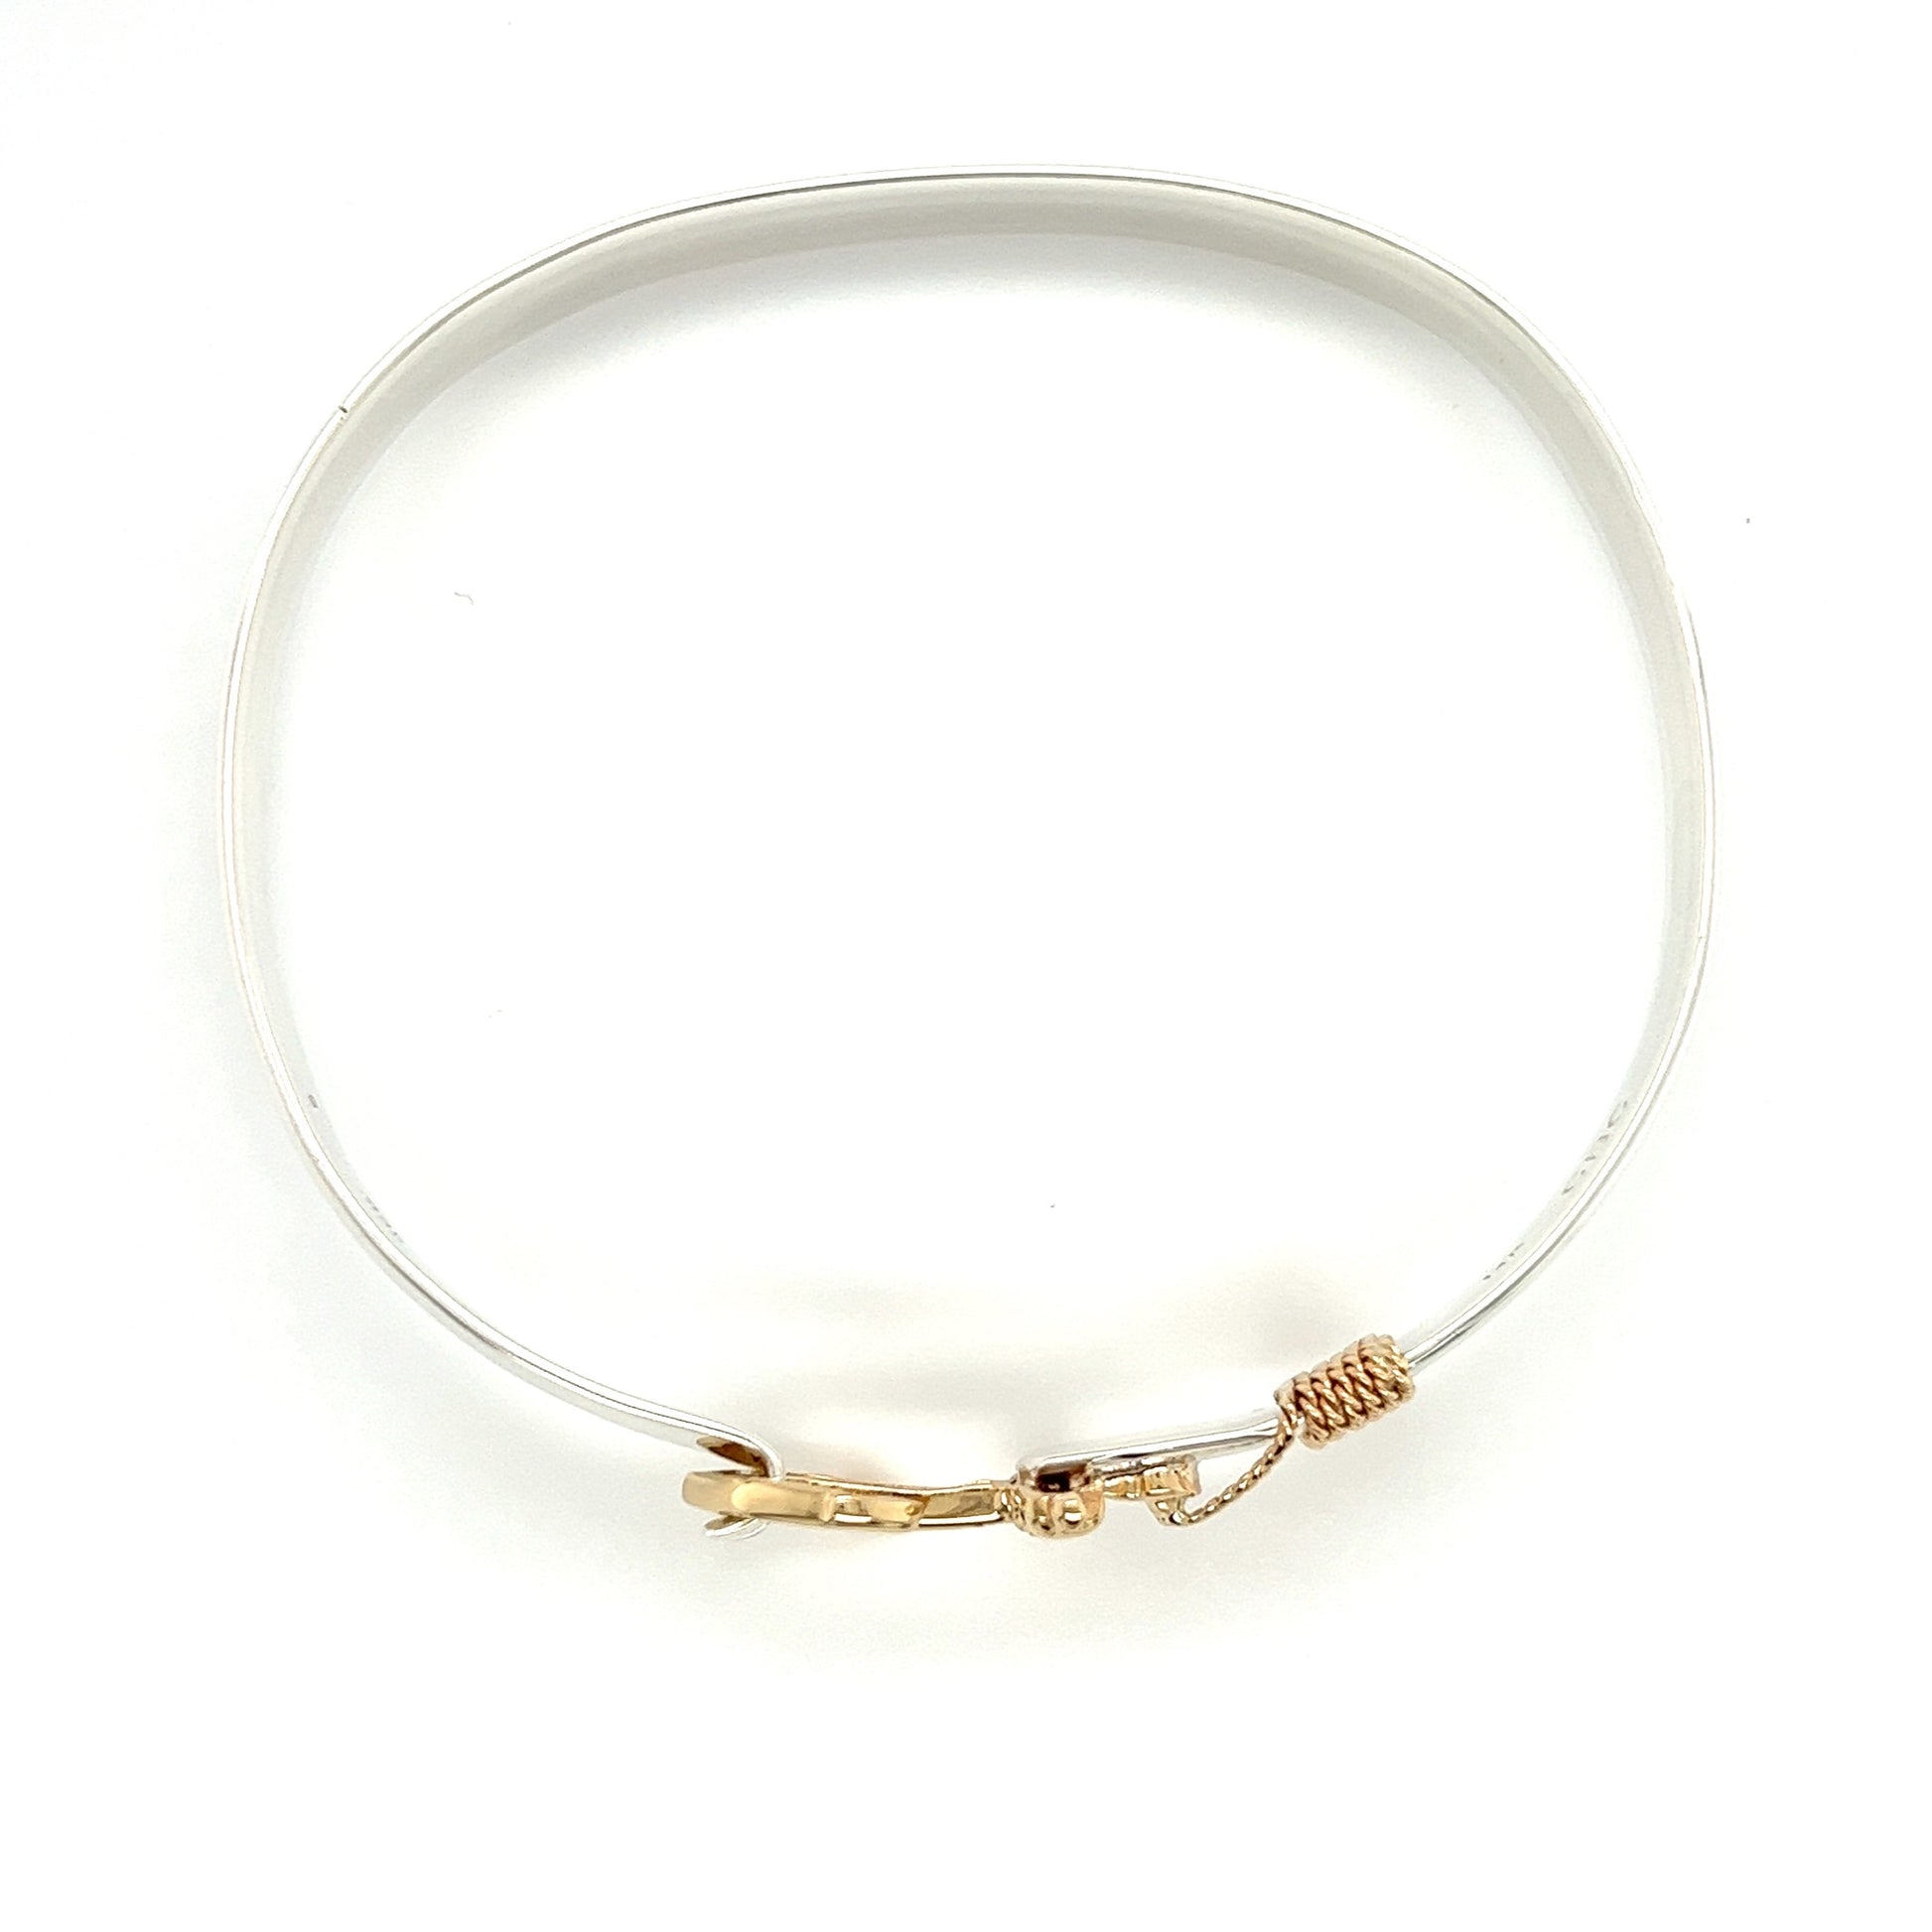 Flat 8mm Bangle Bracelet with 14K Yellow Gold Anchor and Wrap in Sterling Silver Top View